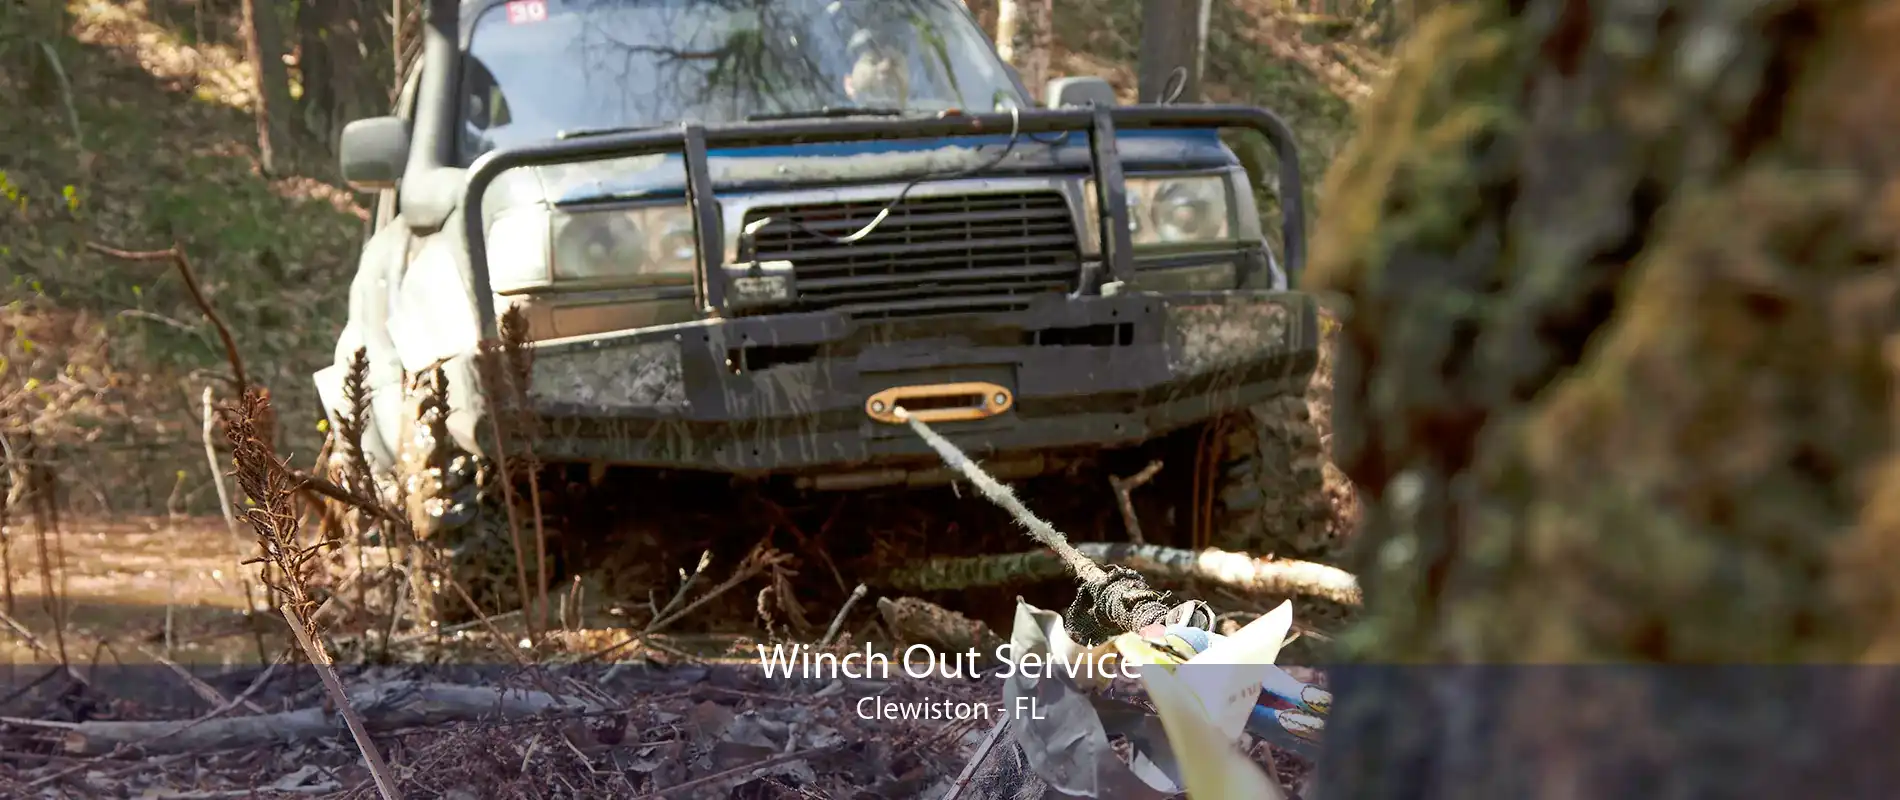 Winch Out Service Clewiston - FL